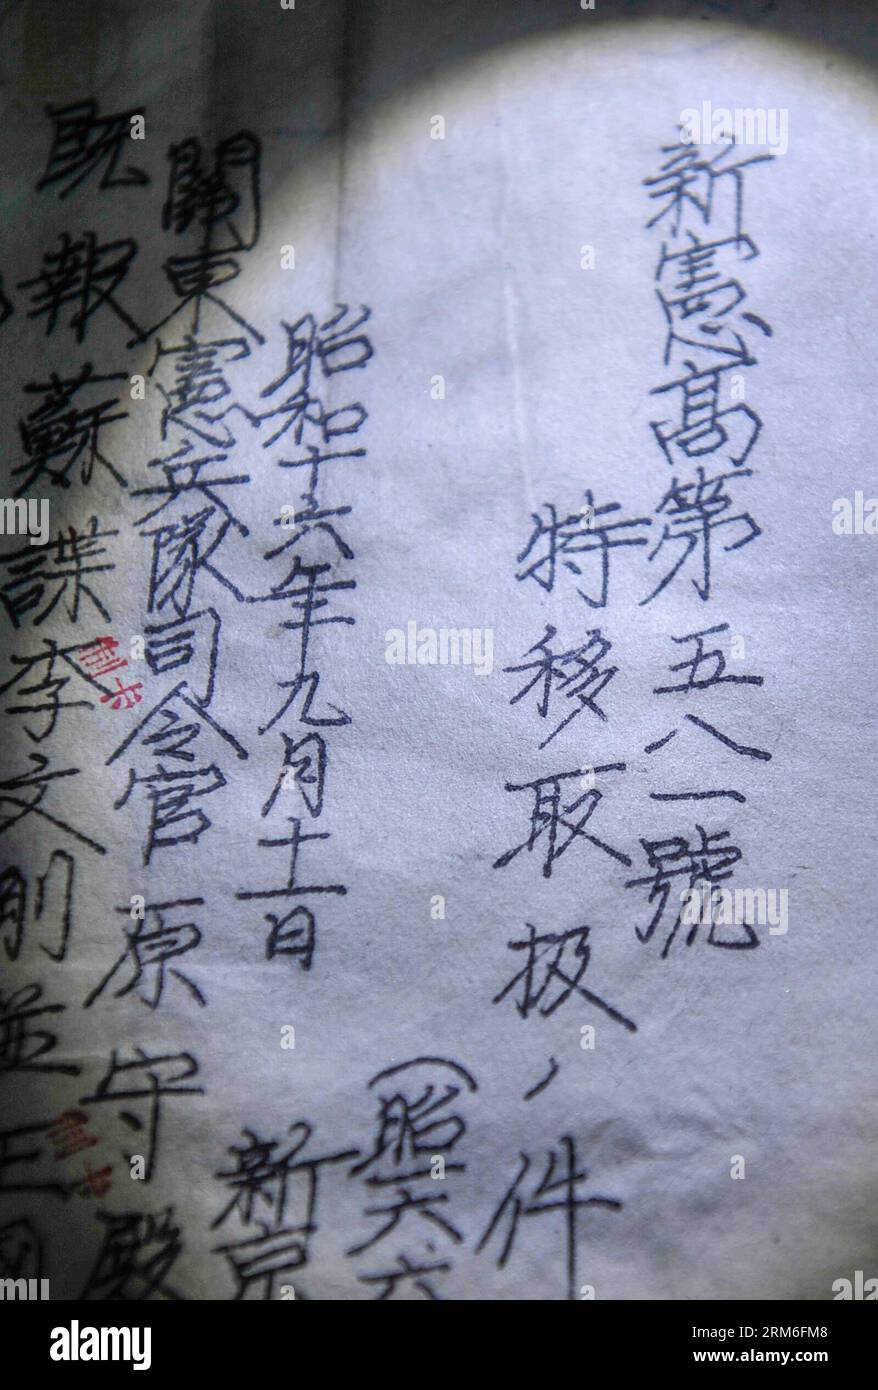 (140110) -- CHANGCHUN, Jan. 10, 2014 (Xinhua) -- Photo taken on Jan. 7, 2014 shows an application of special transfering two Soviet spies to Unit 731 by Japan s Hsinking military police in Changchun, capital of northeast China s Jilin Province. The Japanese documents released on Friday by Jilin Provincial Archives regarding biological warfare show in detail Japanese troops activities in building bacteria forces in its colonial regions and using human beings for experiments to develop biological weapons during World War II. According to the archives, Japanese bacteria forces including Unit 731 Stock Photo